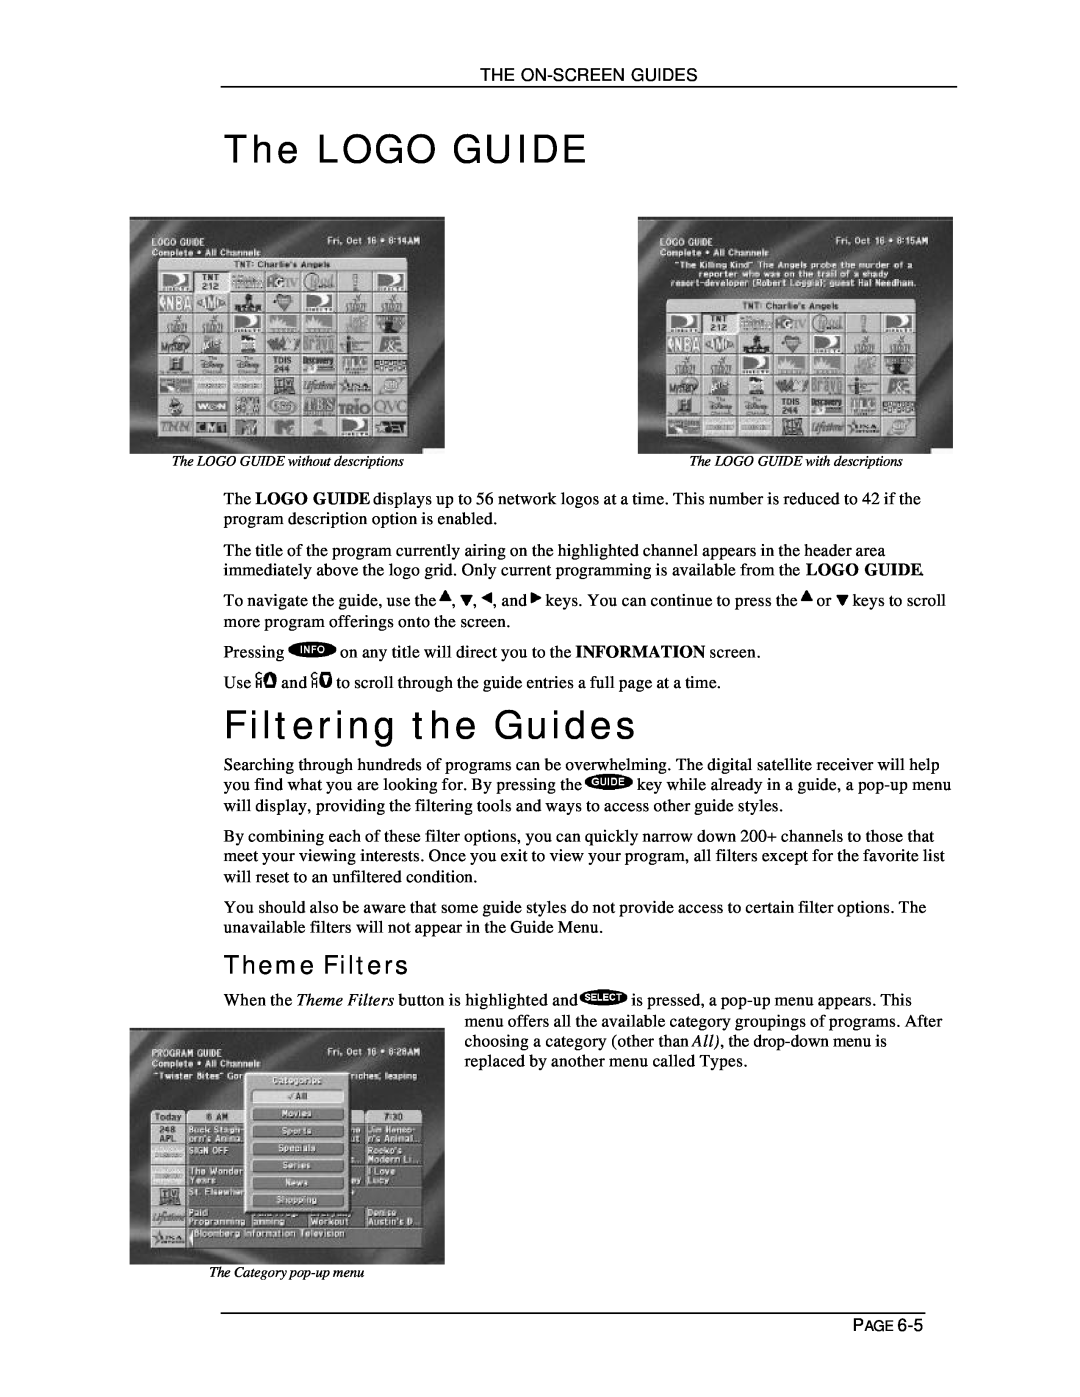 DirecTV HIRD-D11, HIRD-D01 owner manual The LOGO GUIDE, Filtering the Guides, Theme Filters 